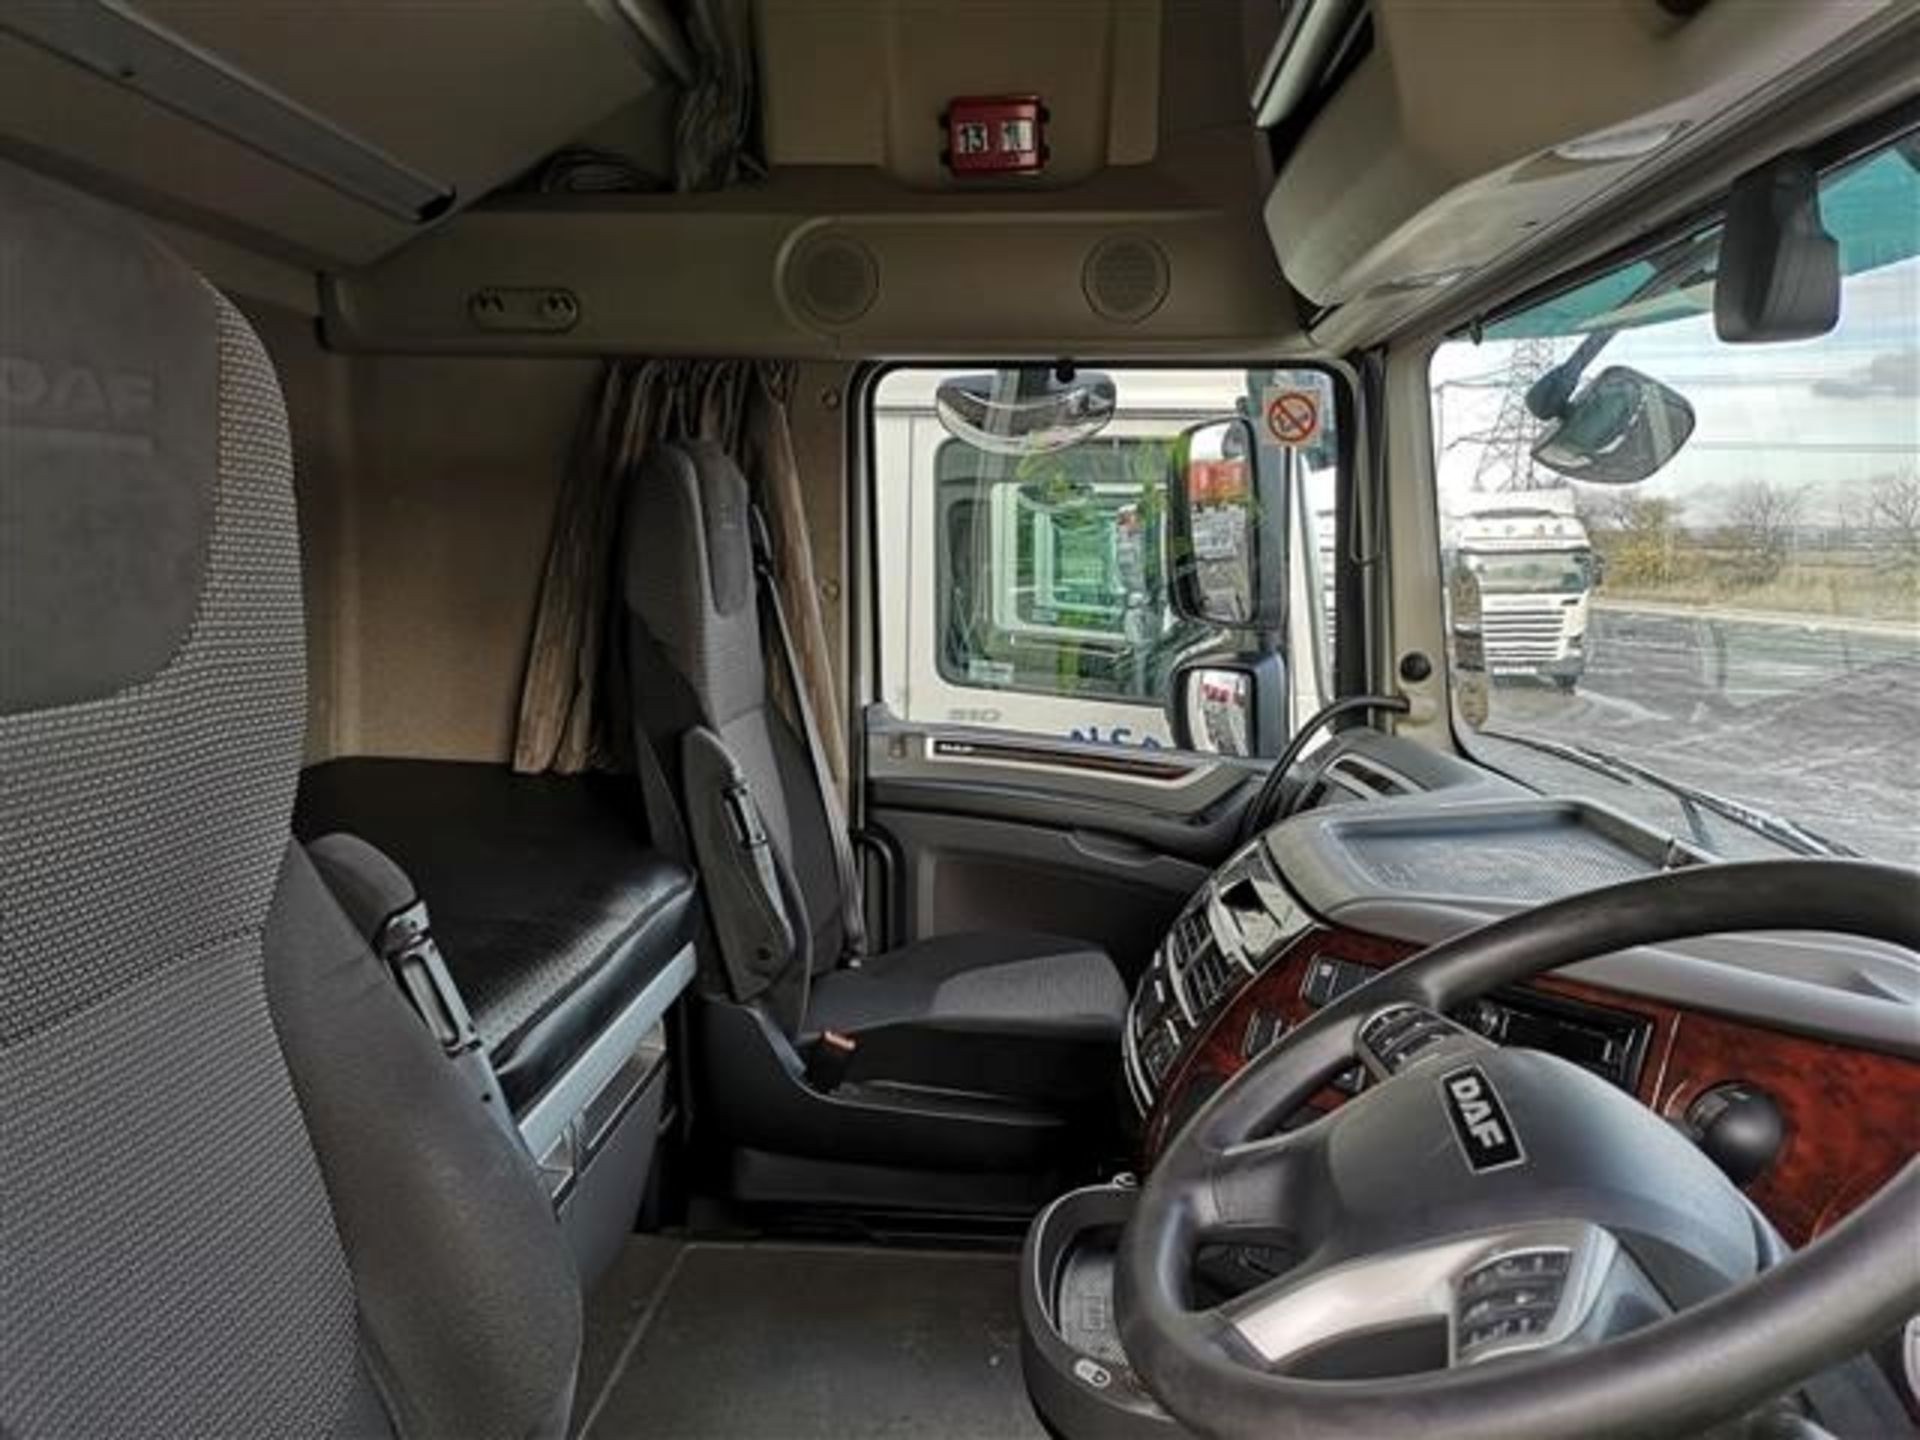 DAF FTG XF 510 6x2 Superspace cab tractor unit - Image 8 of 10